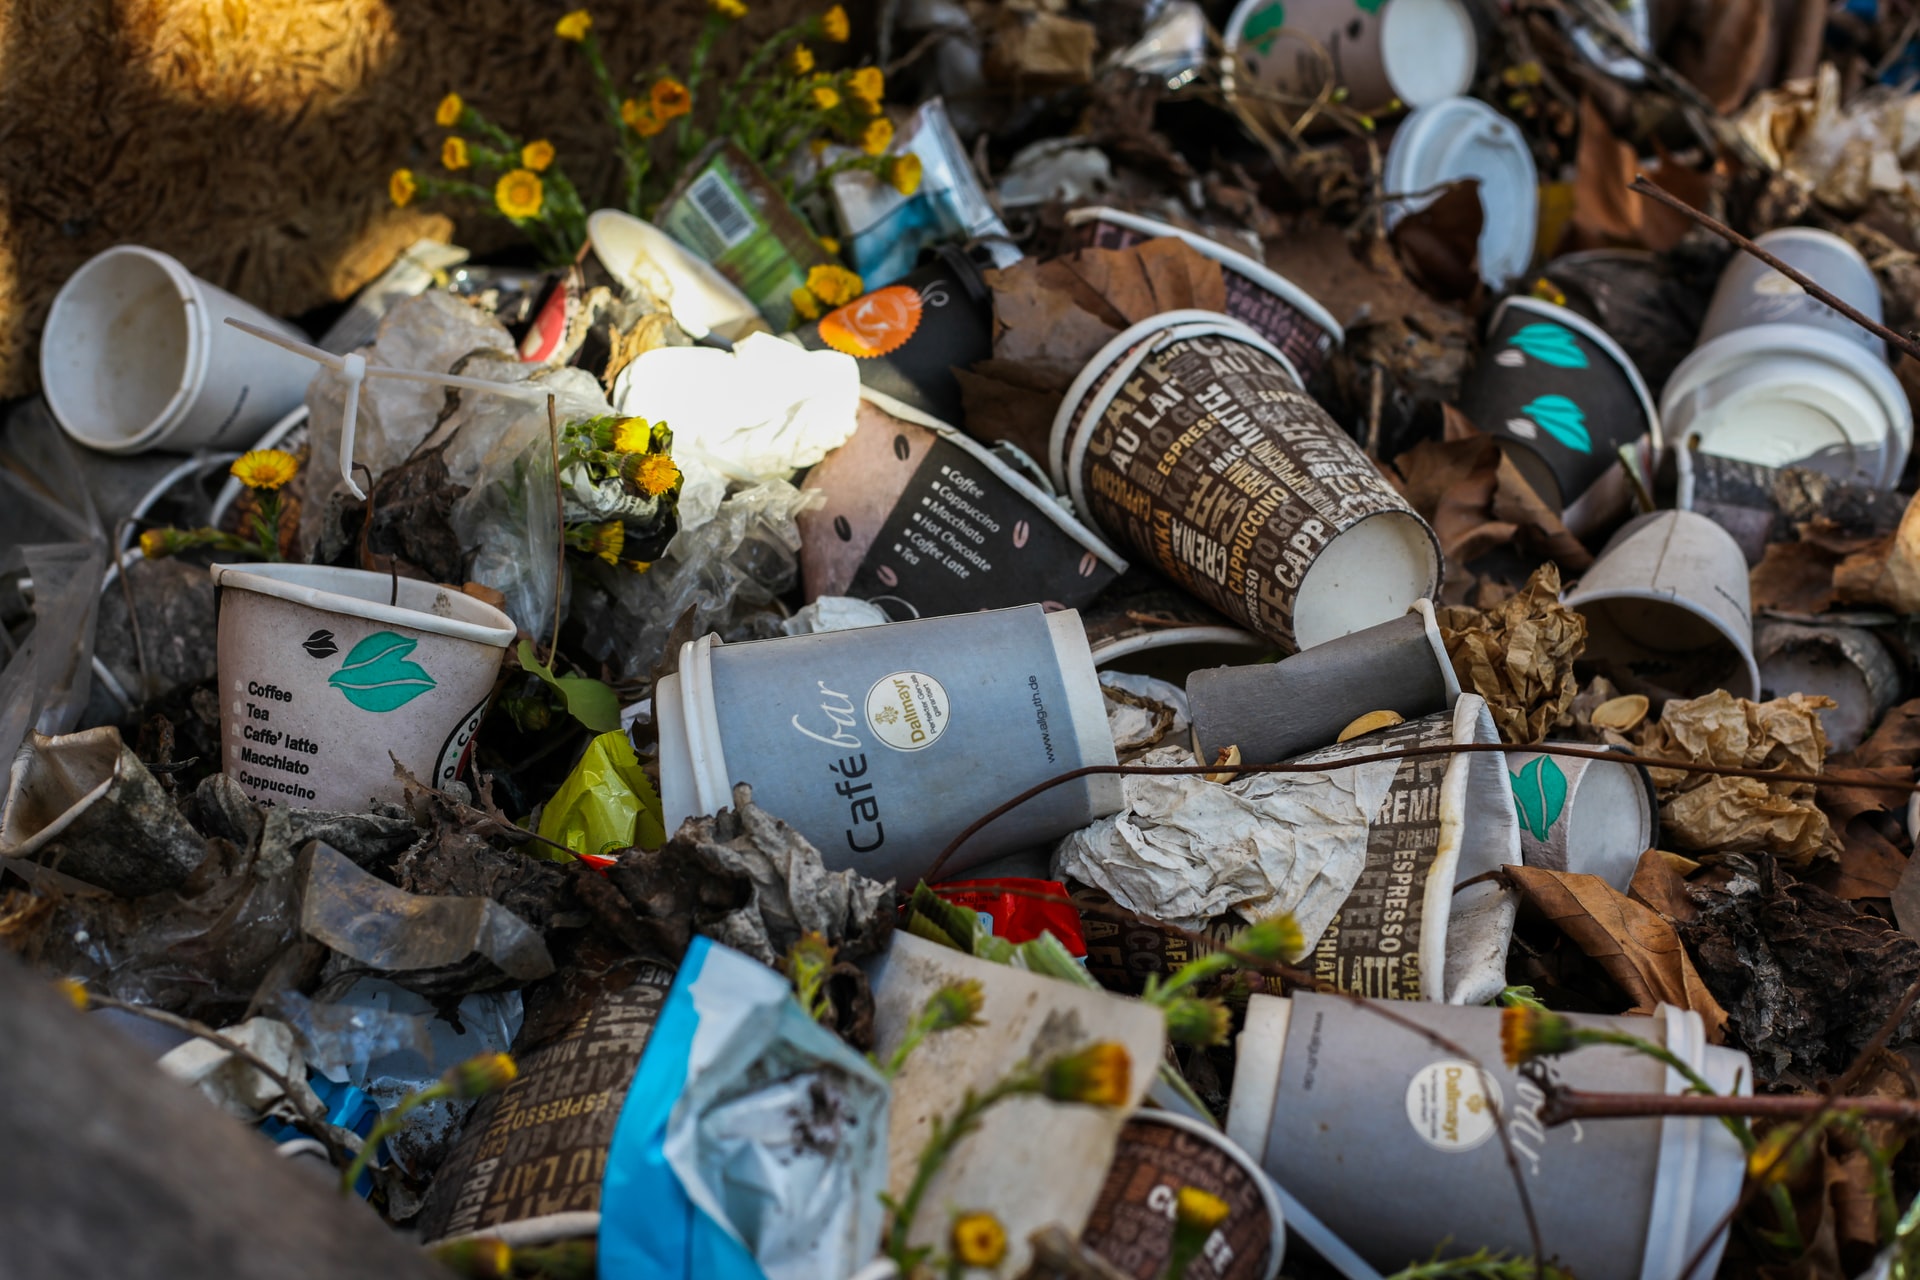 Earlier European agreements were made that the use of single-use plastic must be drastically reduced by 2026. Member States may decide for themselves how they supplement this. With these measures, Van Weyenberg expects a 40% decrease in 2026 compared to 2022.